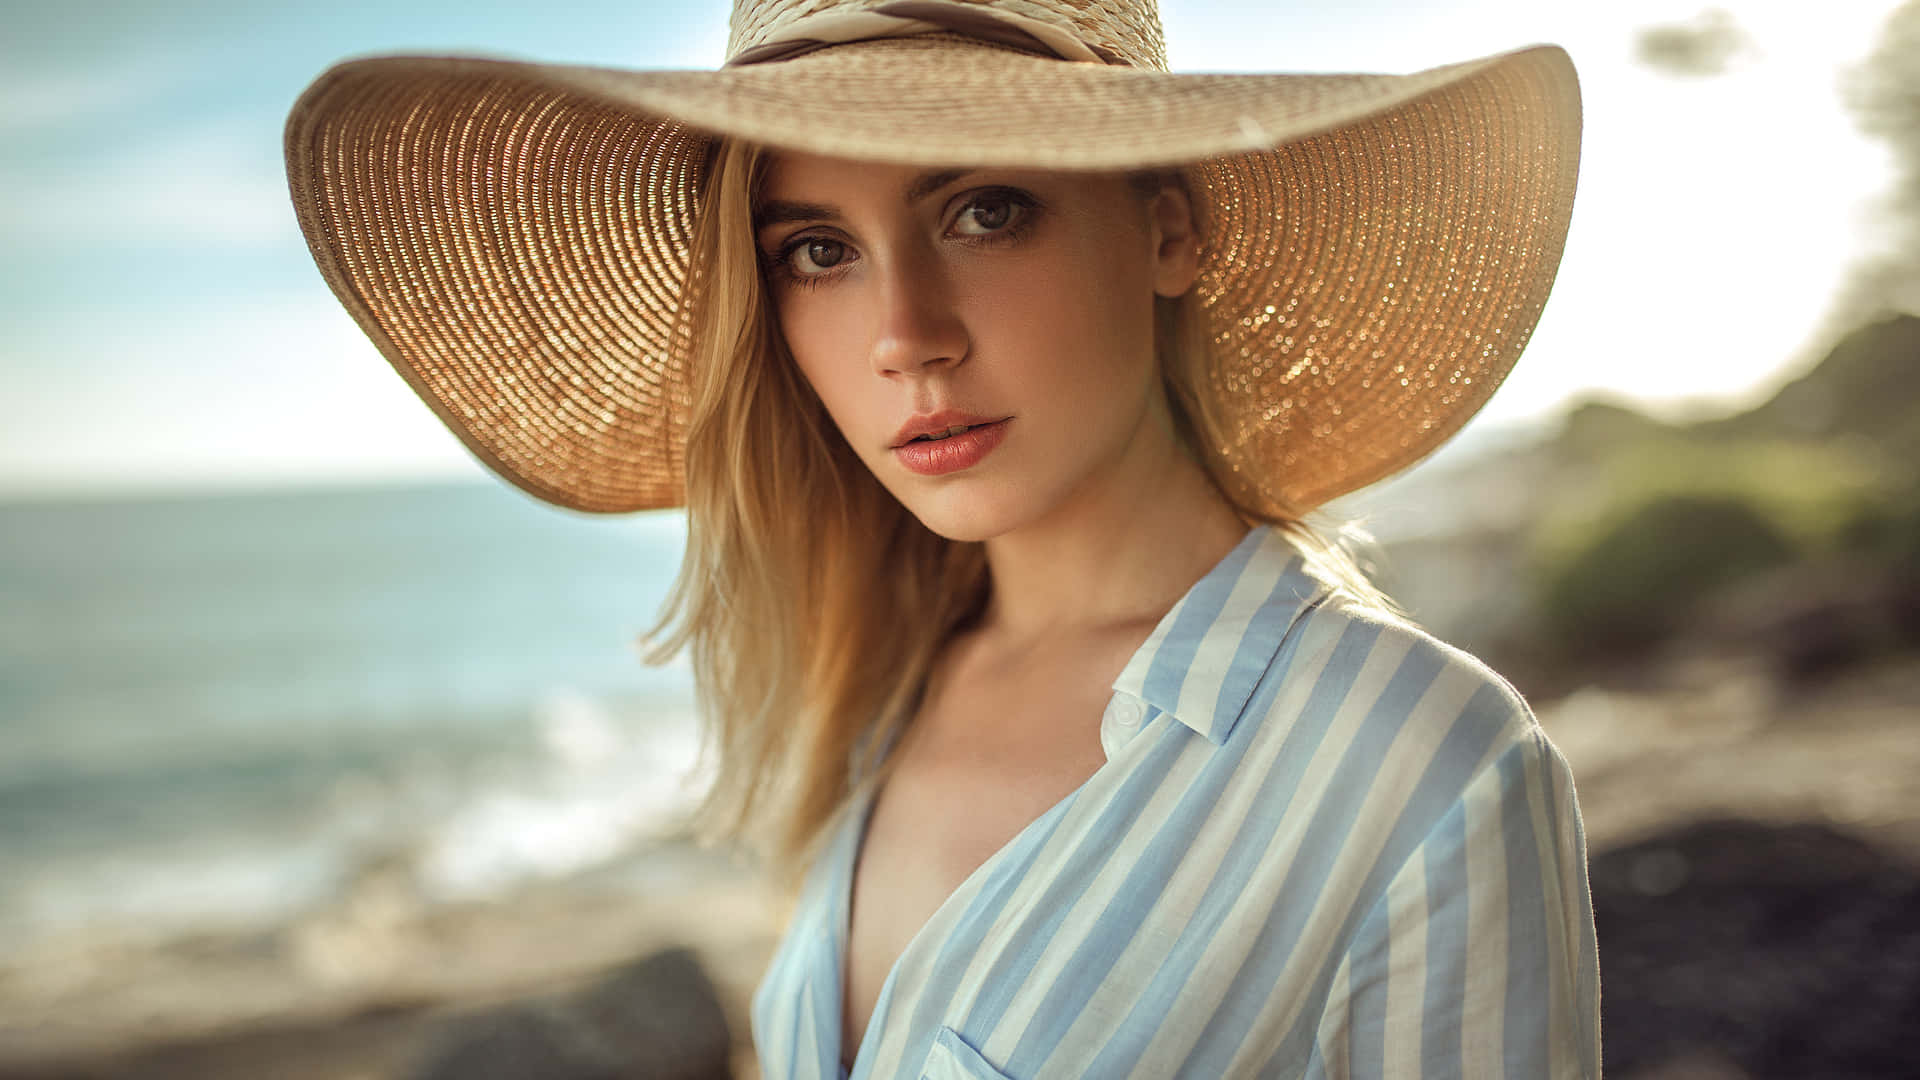 Relaxing Beach Day with a Stylish Hat Wallpaper